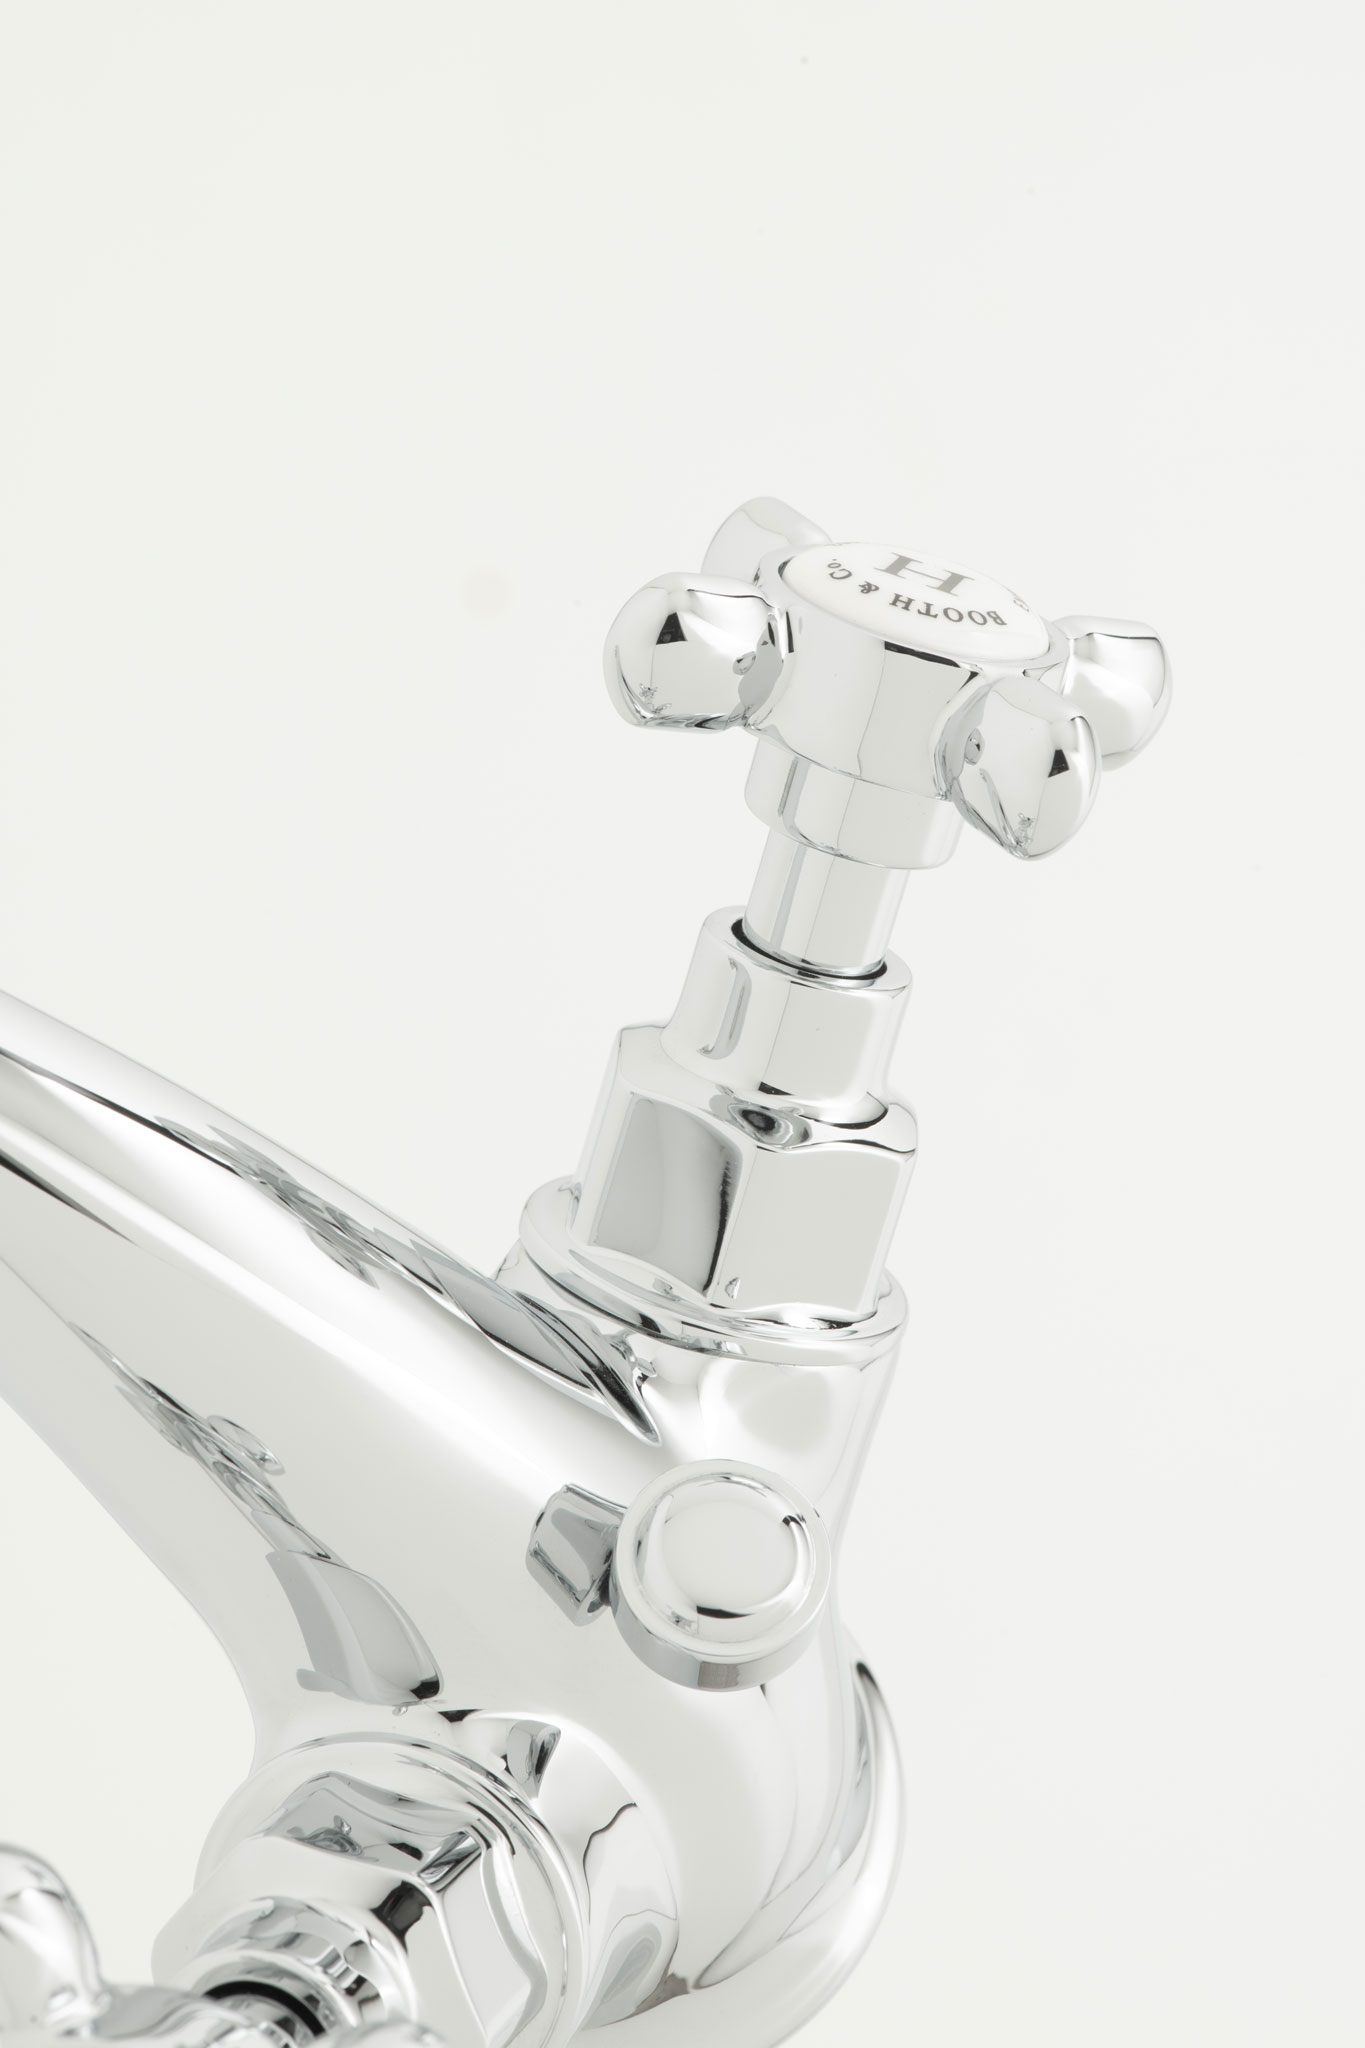 Traditional basin mixer from above for design layout